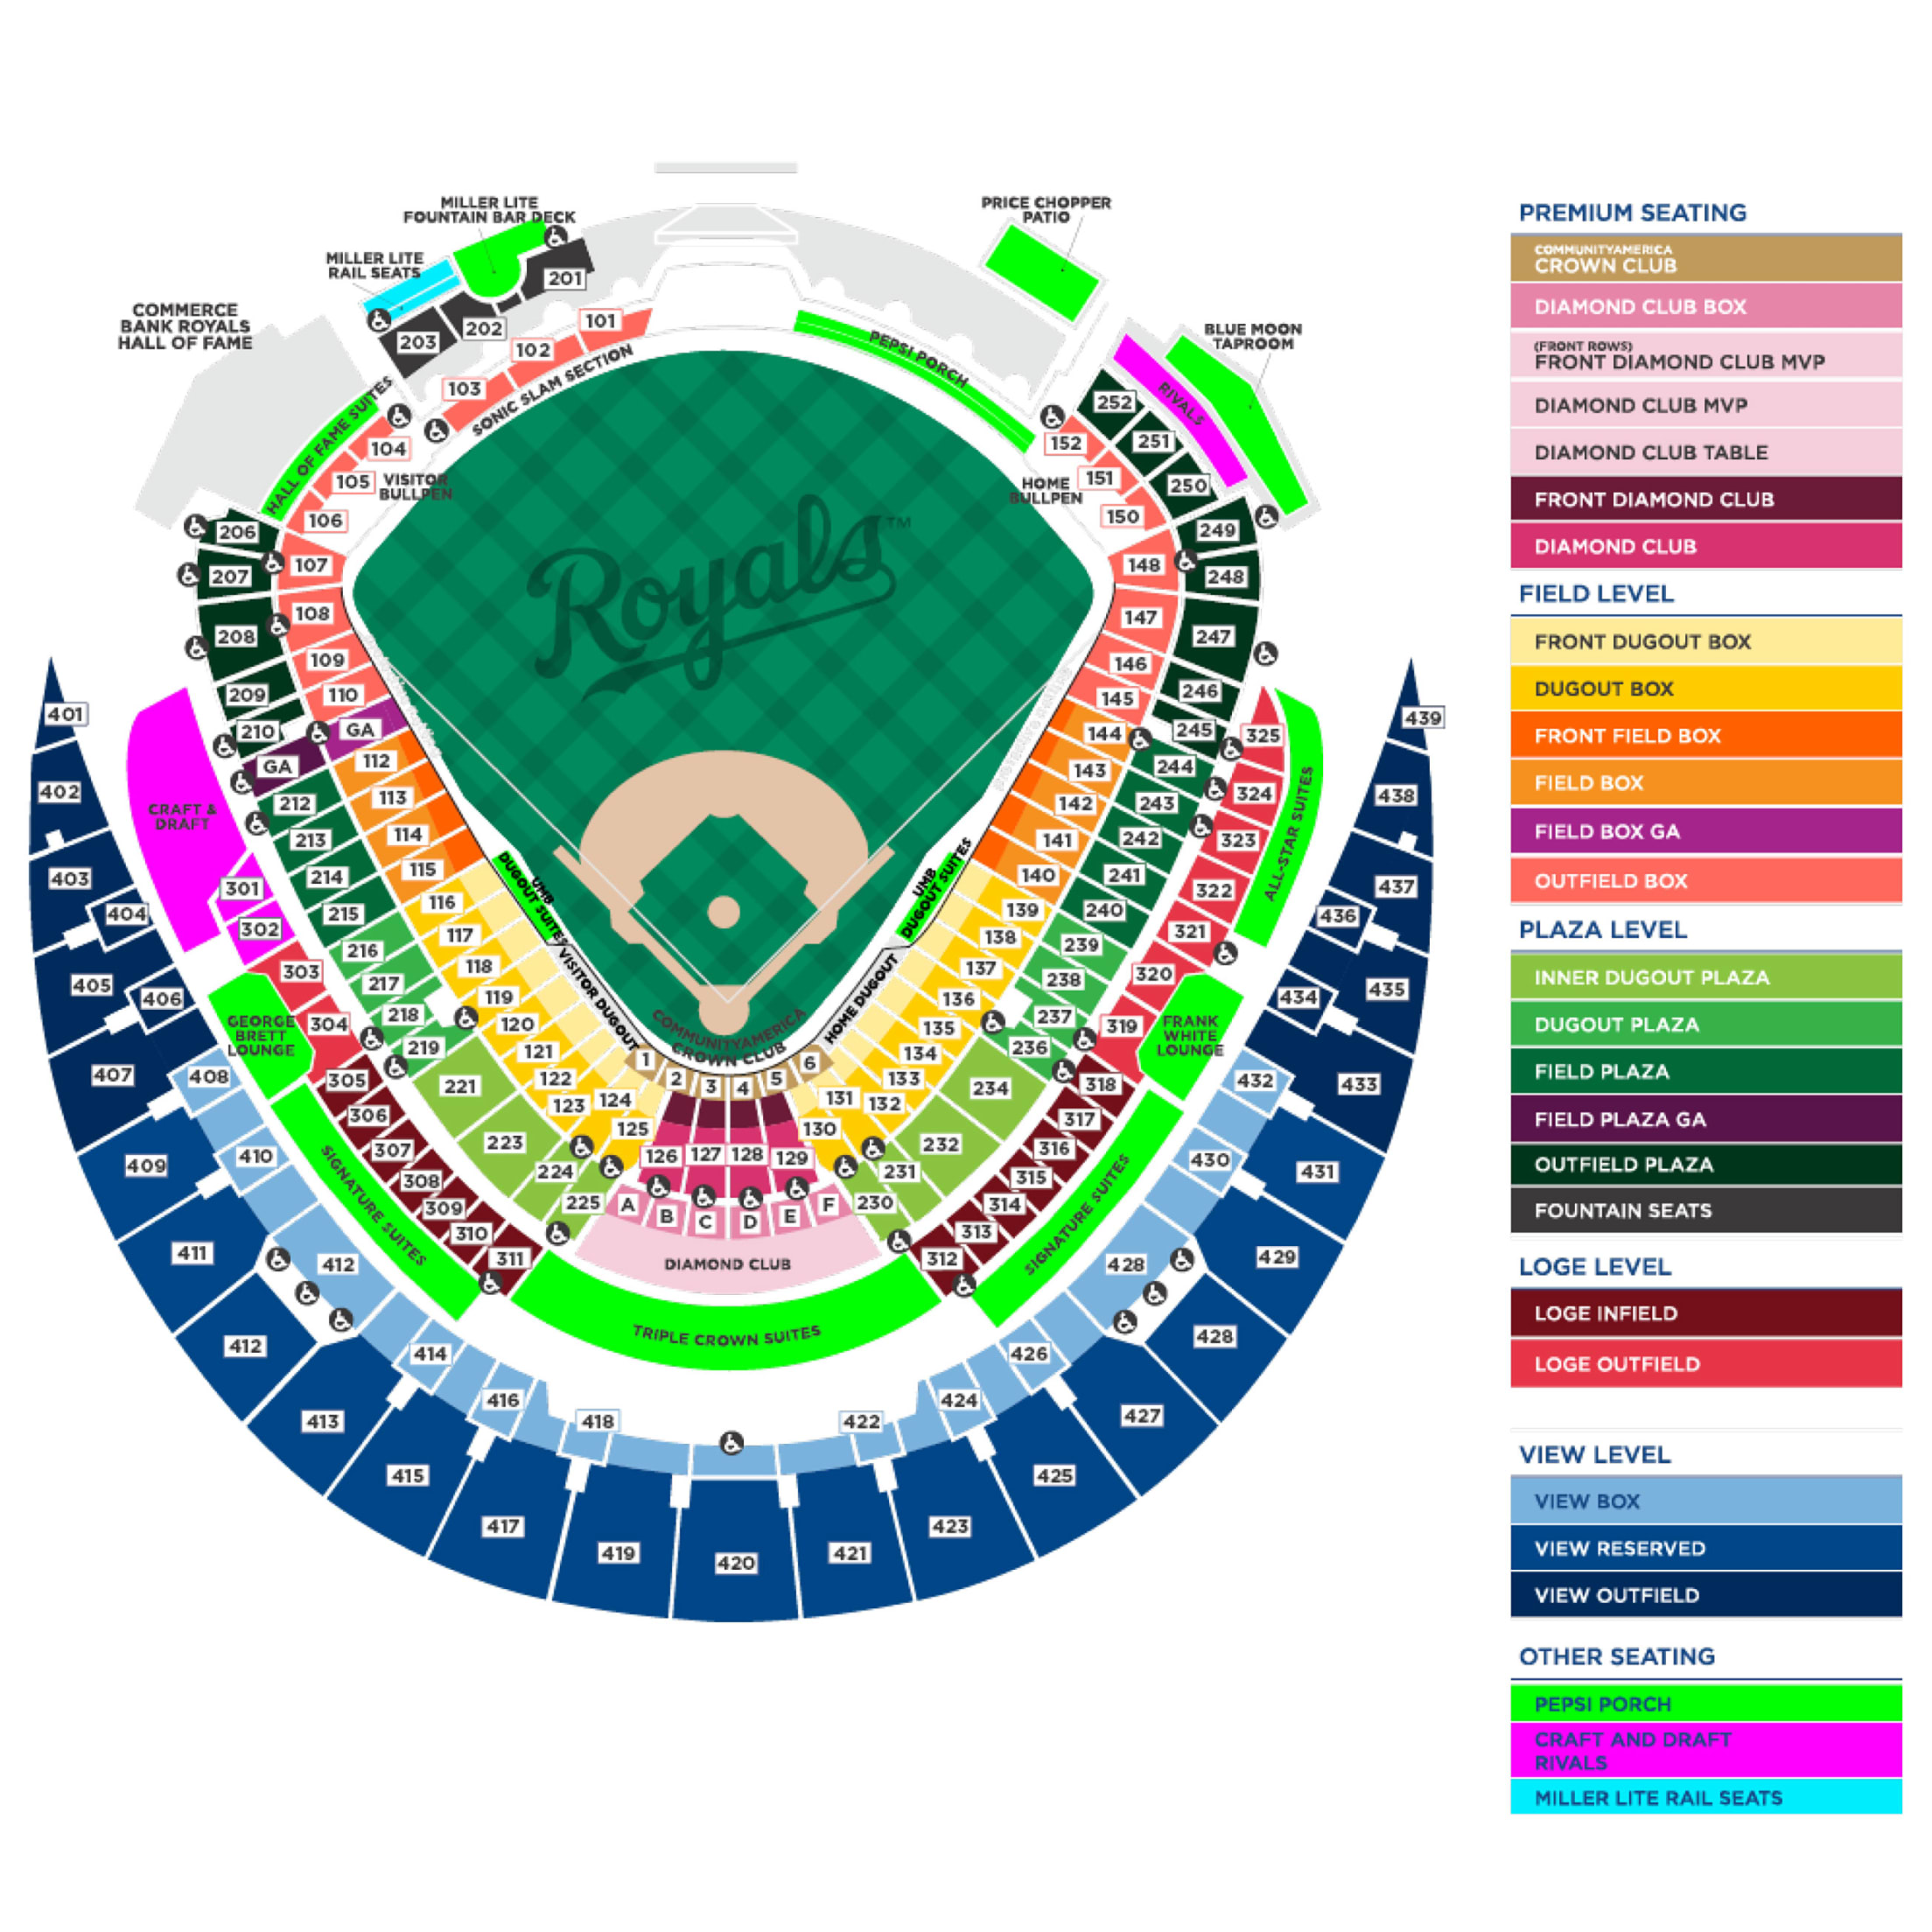 Group Ticket Seating & Pricing